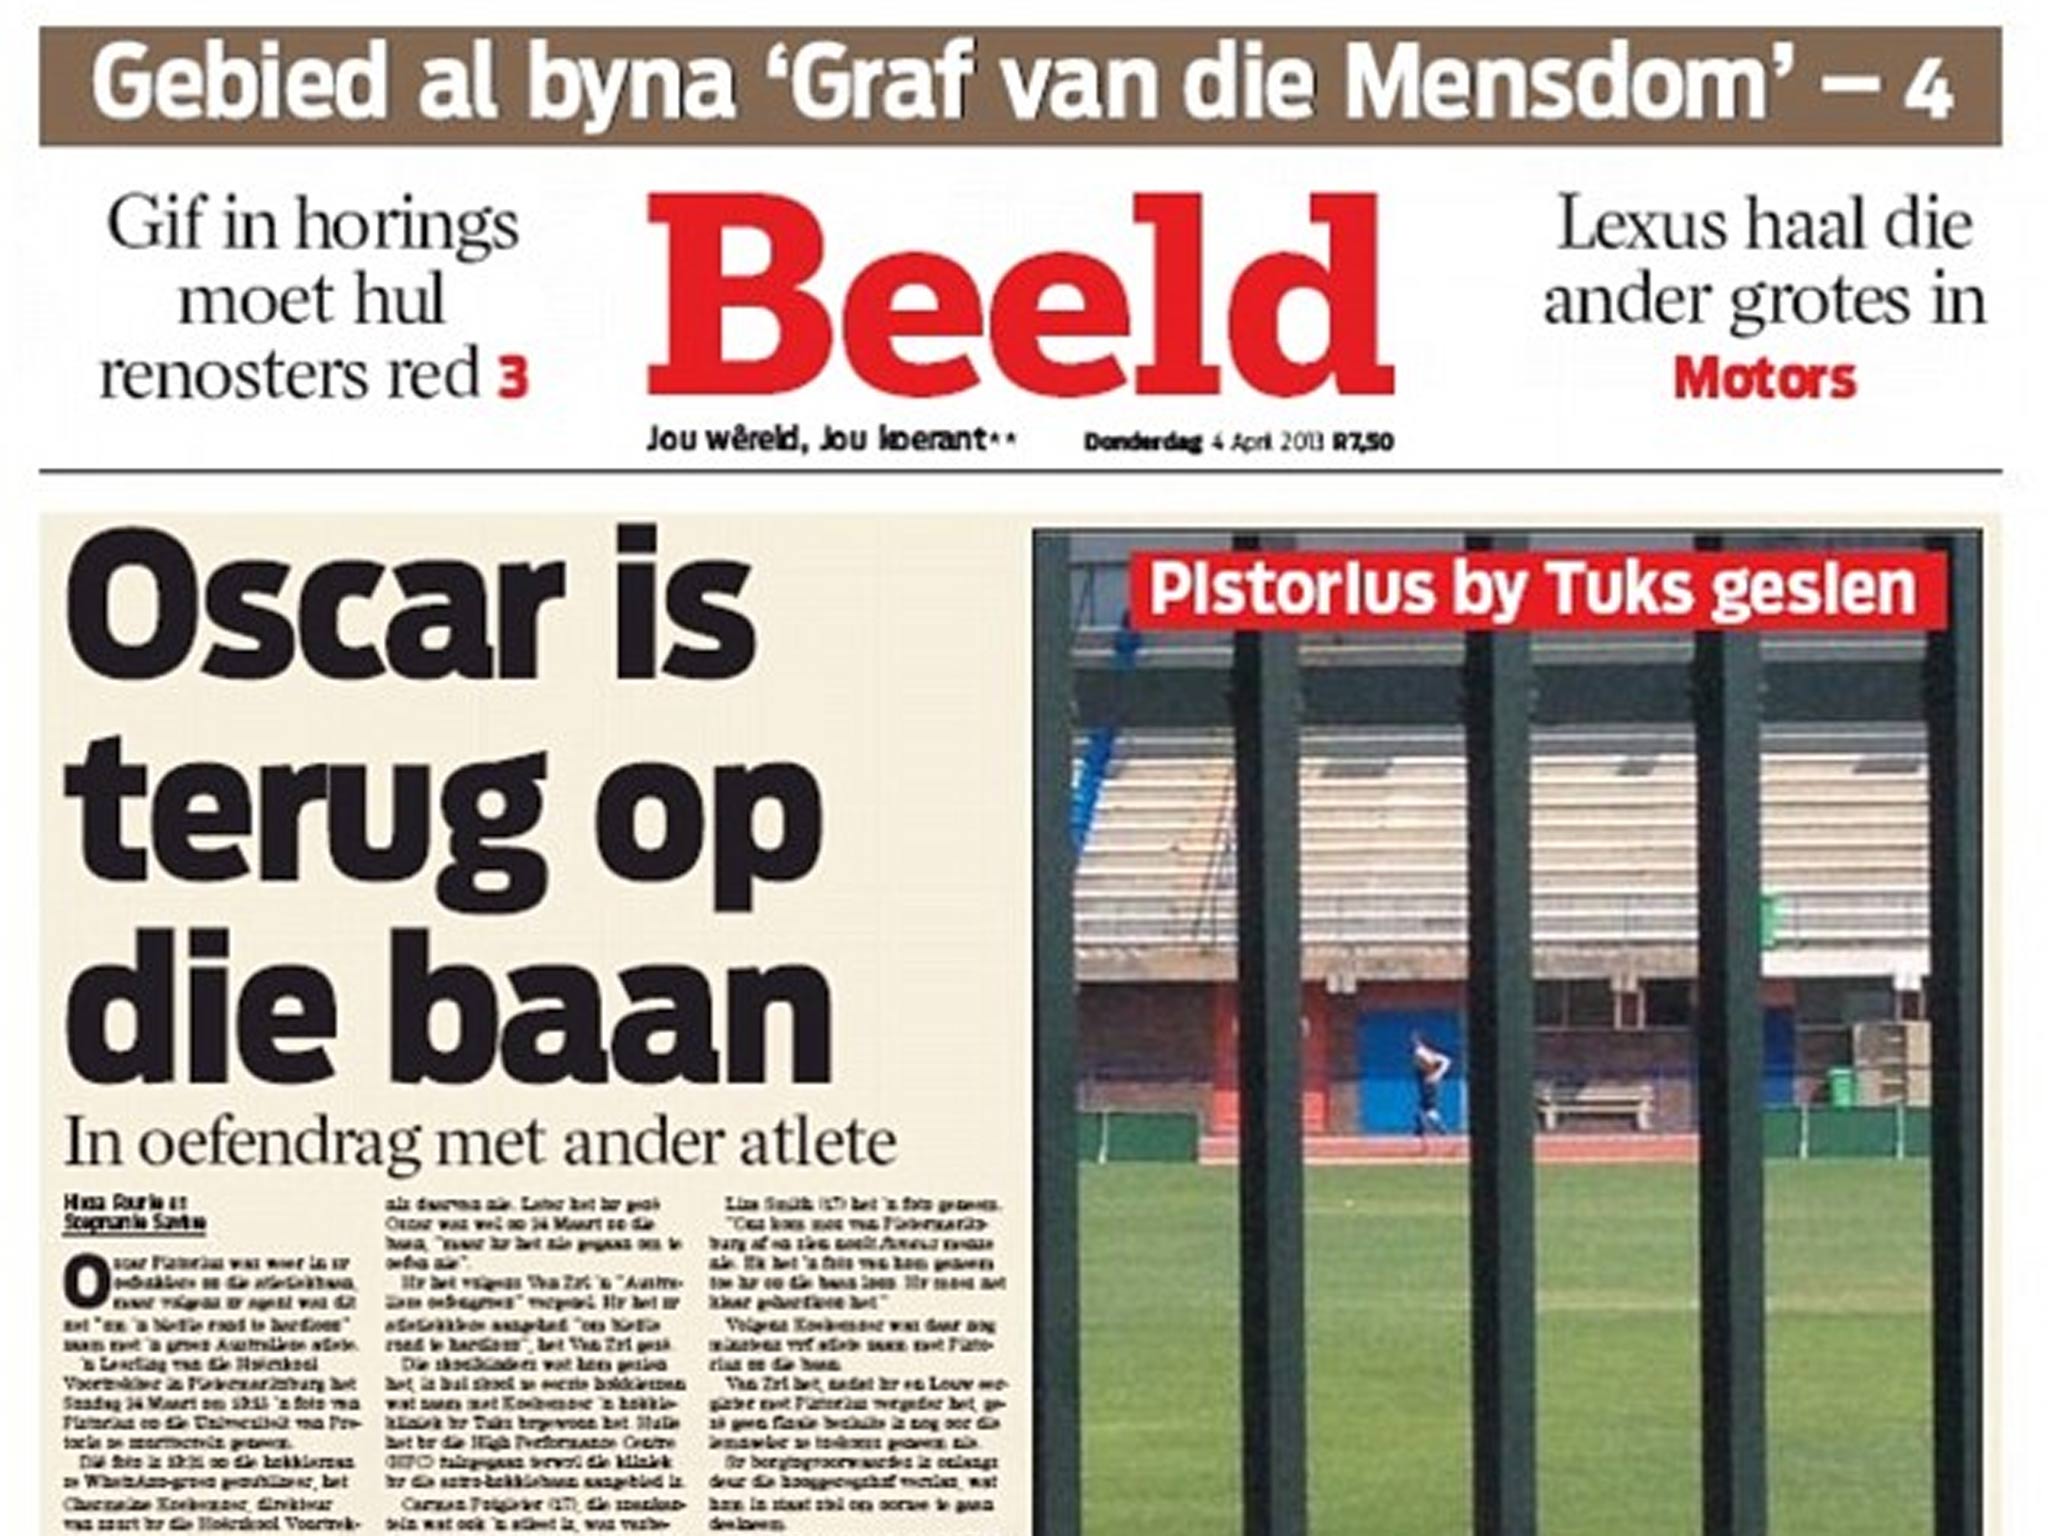 South African newspaper Beeld used the image on their front page